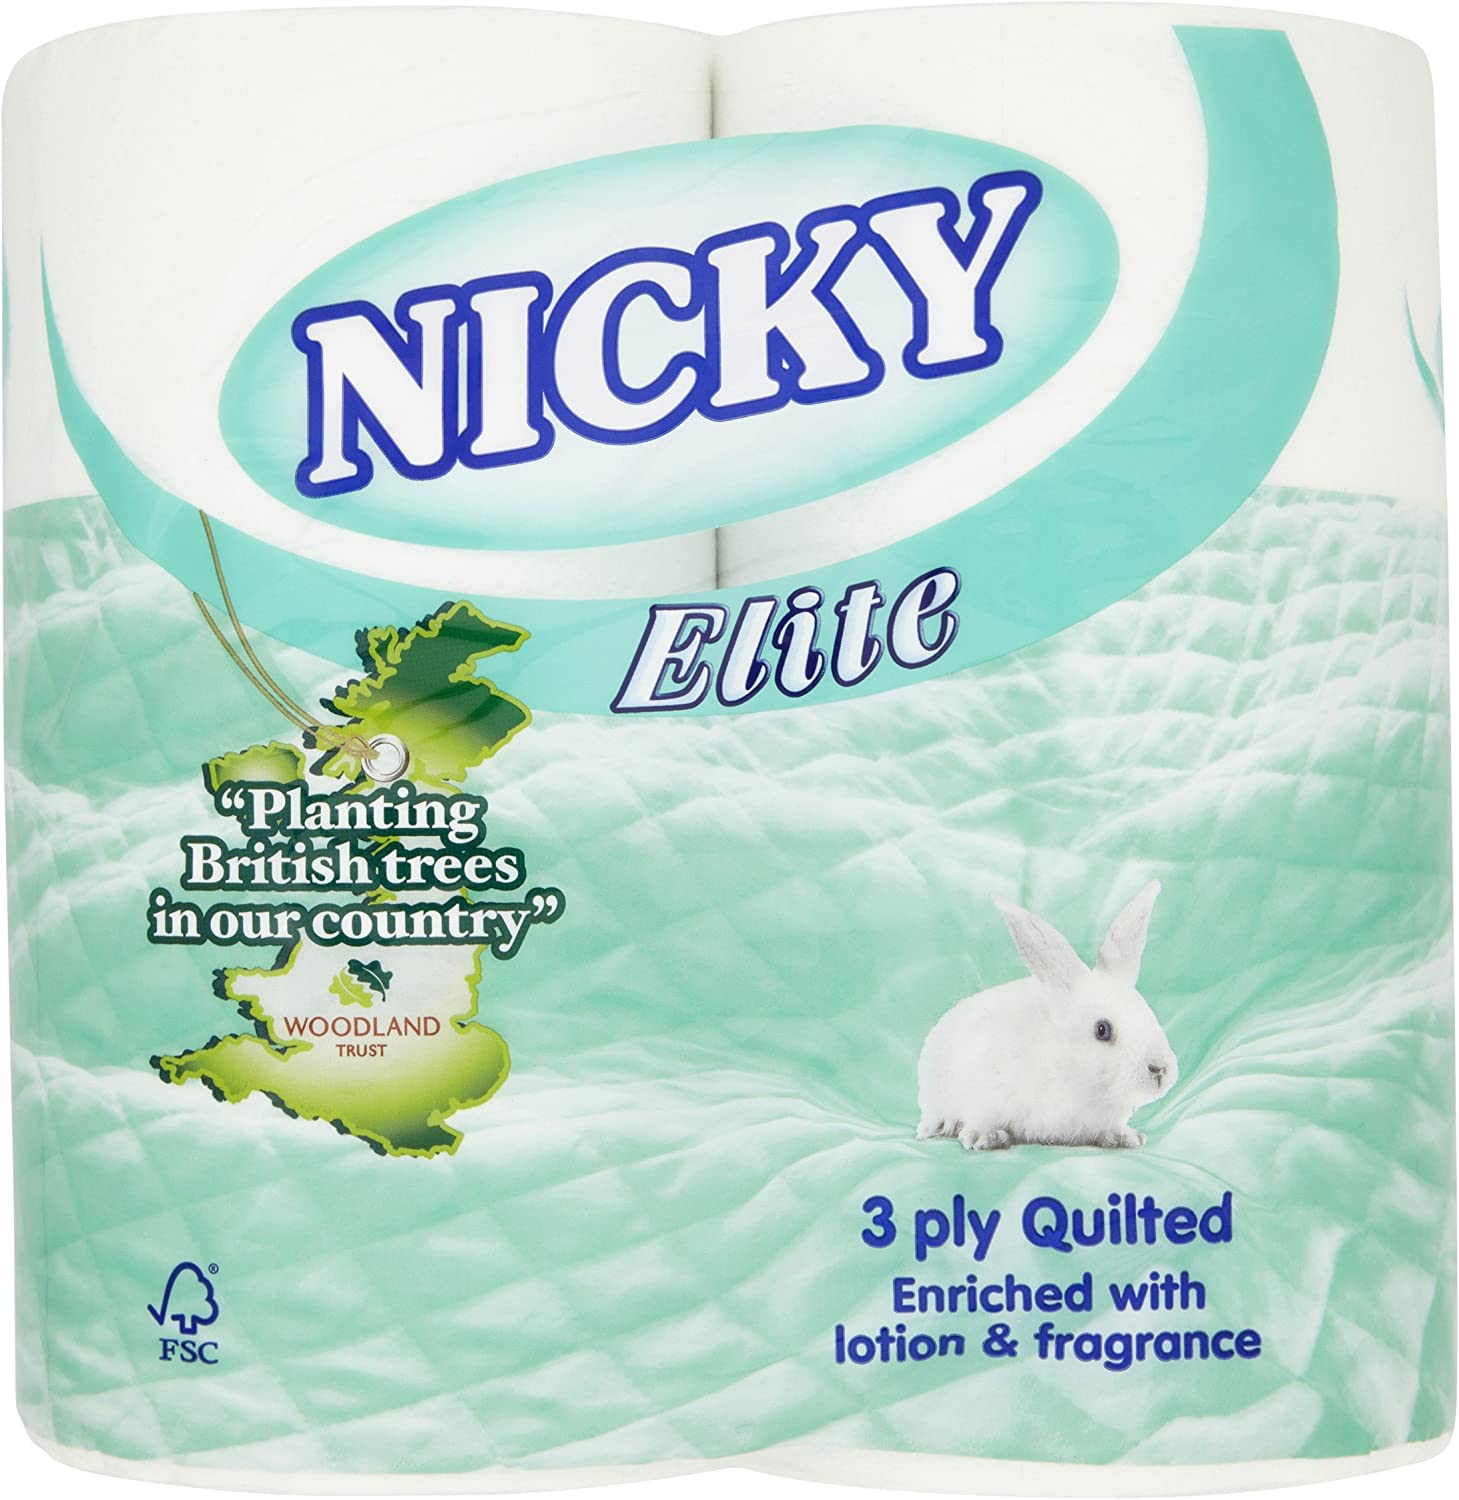 Nicky Elite Enriched with Lotion & Fragrance 3 Ply Quilted 4 Rolls RRP £2.99 CLEARANCE £2.50